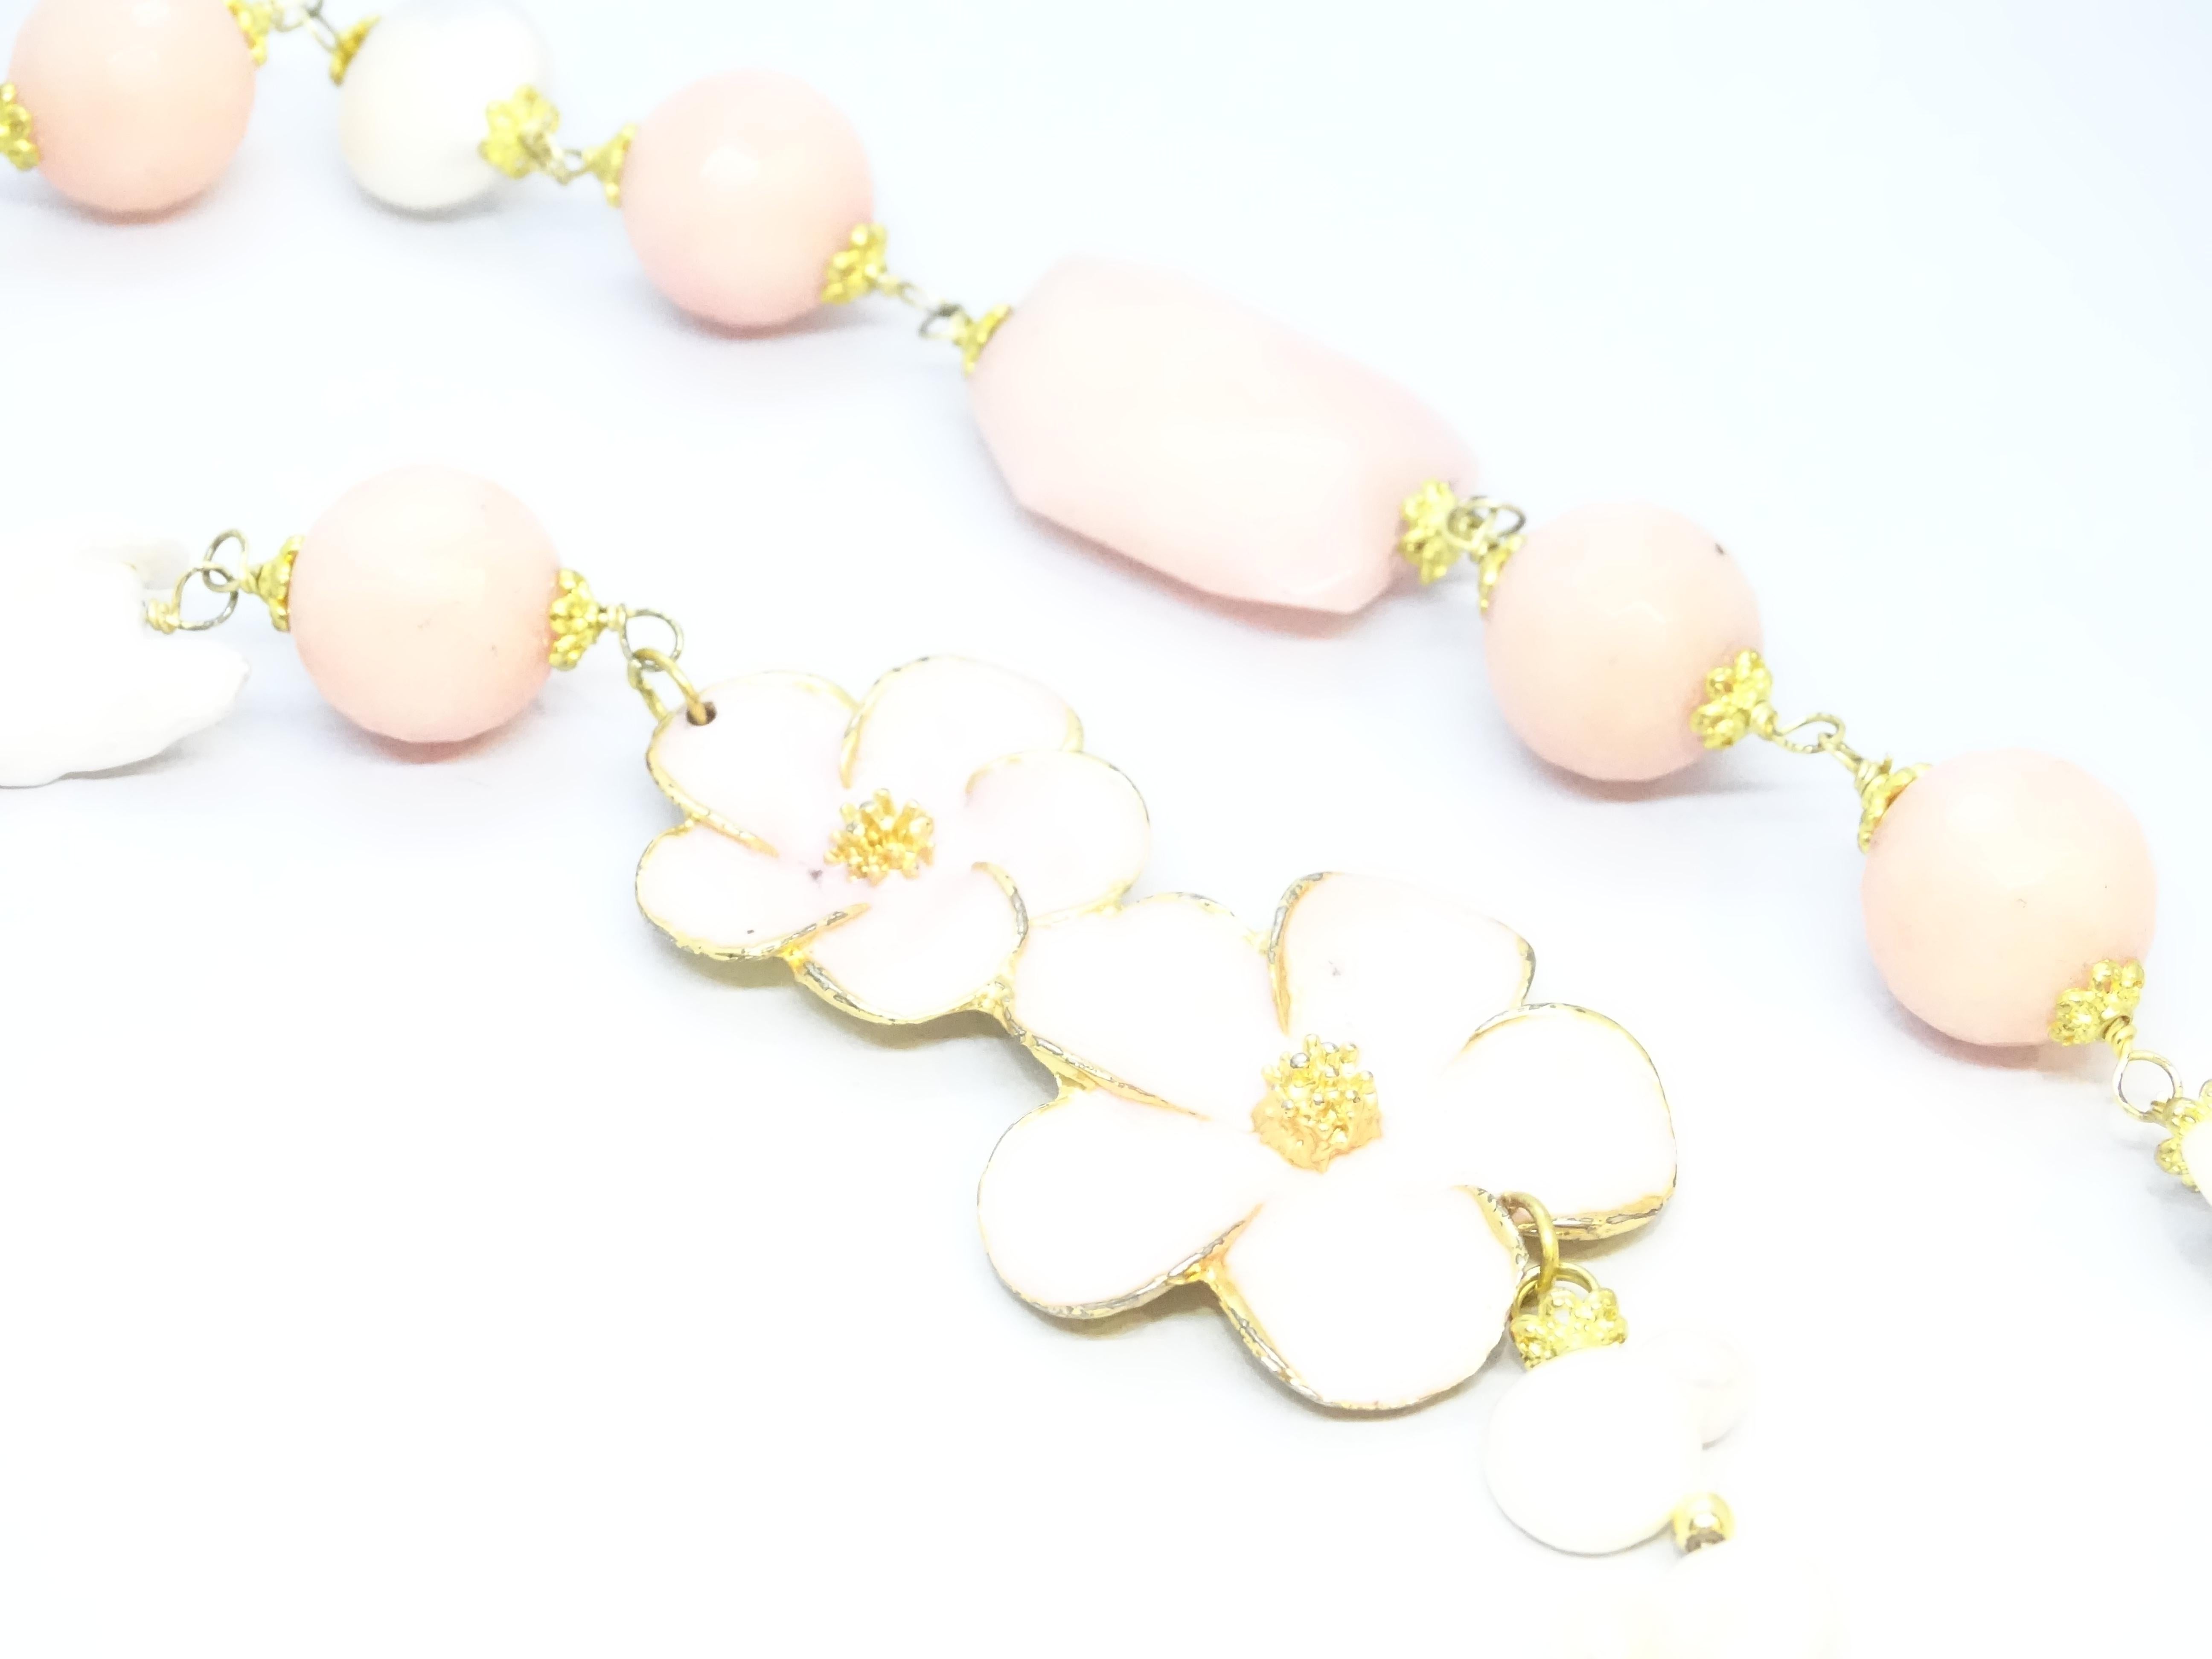 Italian necklace with baroque pearls, rose quartz and enamel For Sale 7